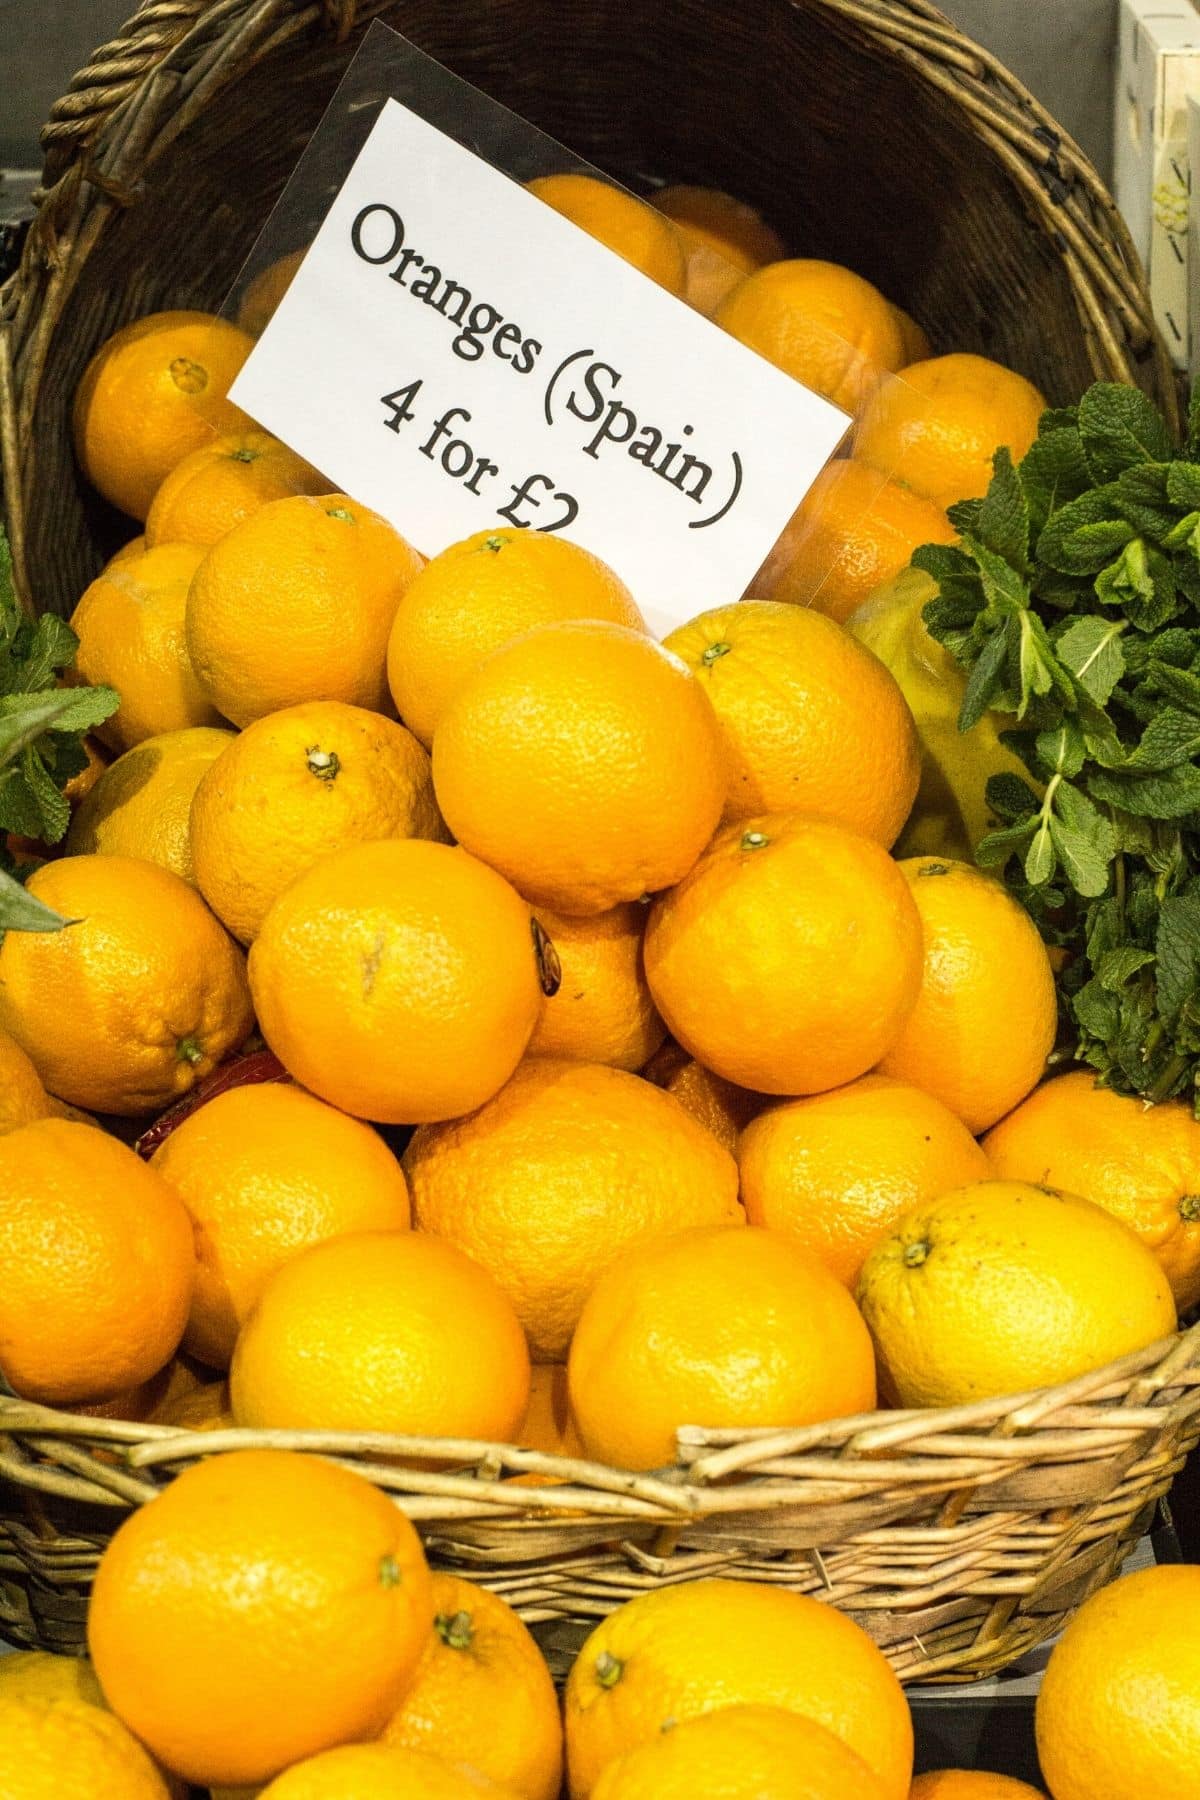 spanish oranges in a basket with price tag.